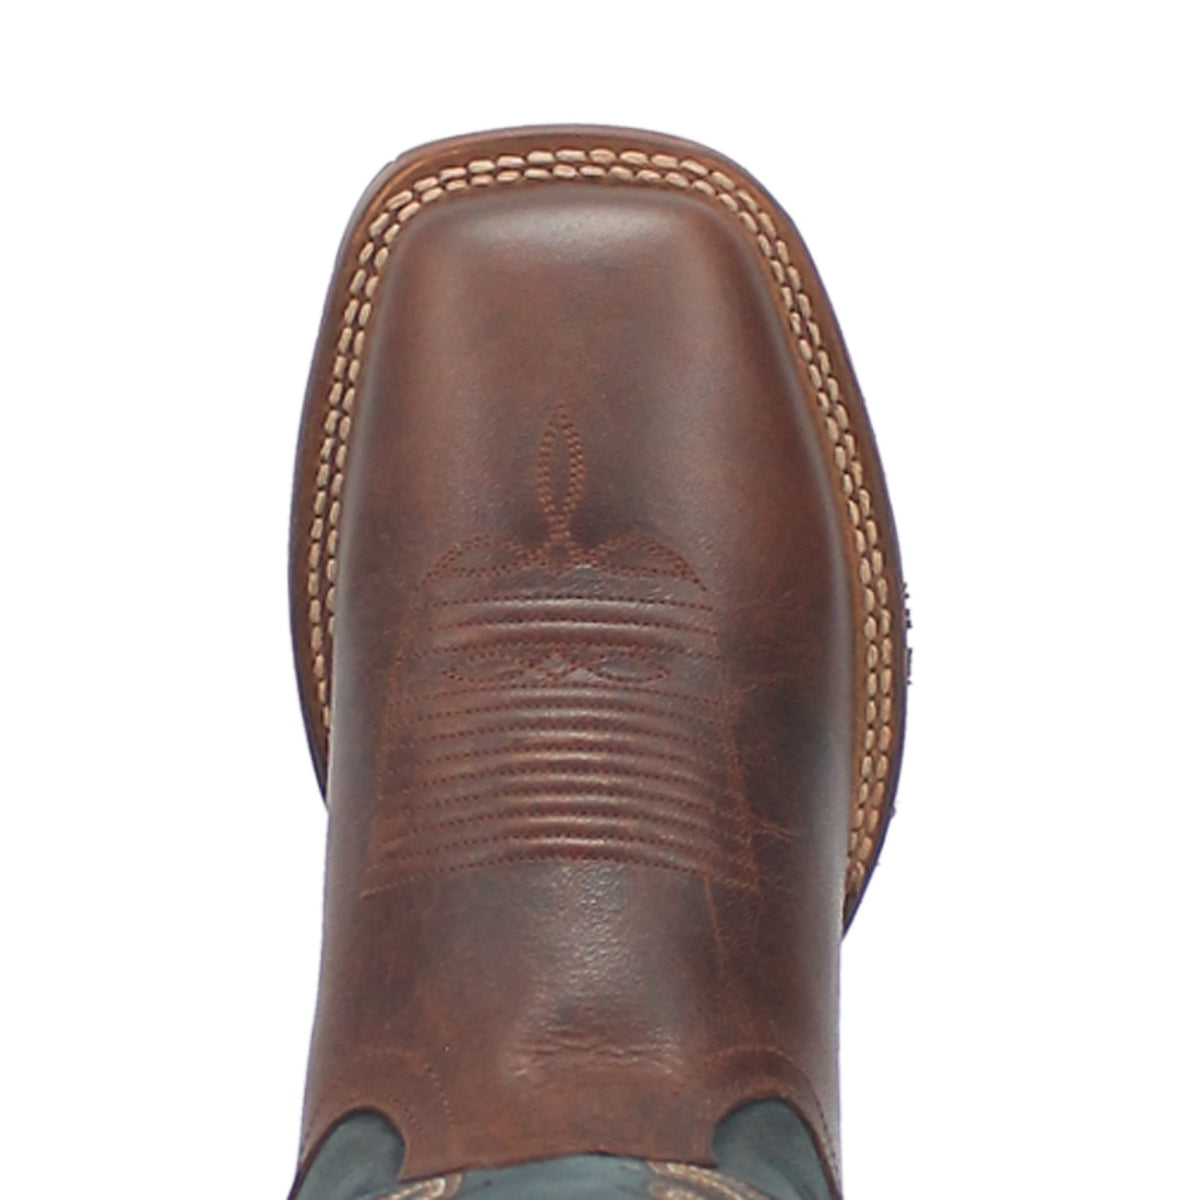 IVAN LEATHER BOOT Cover